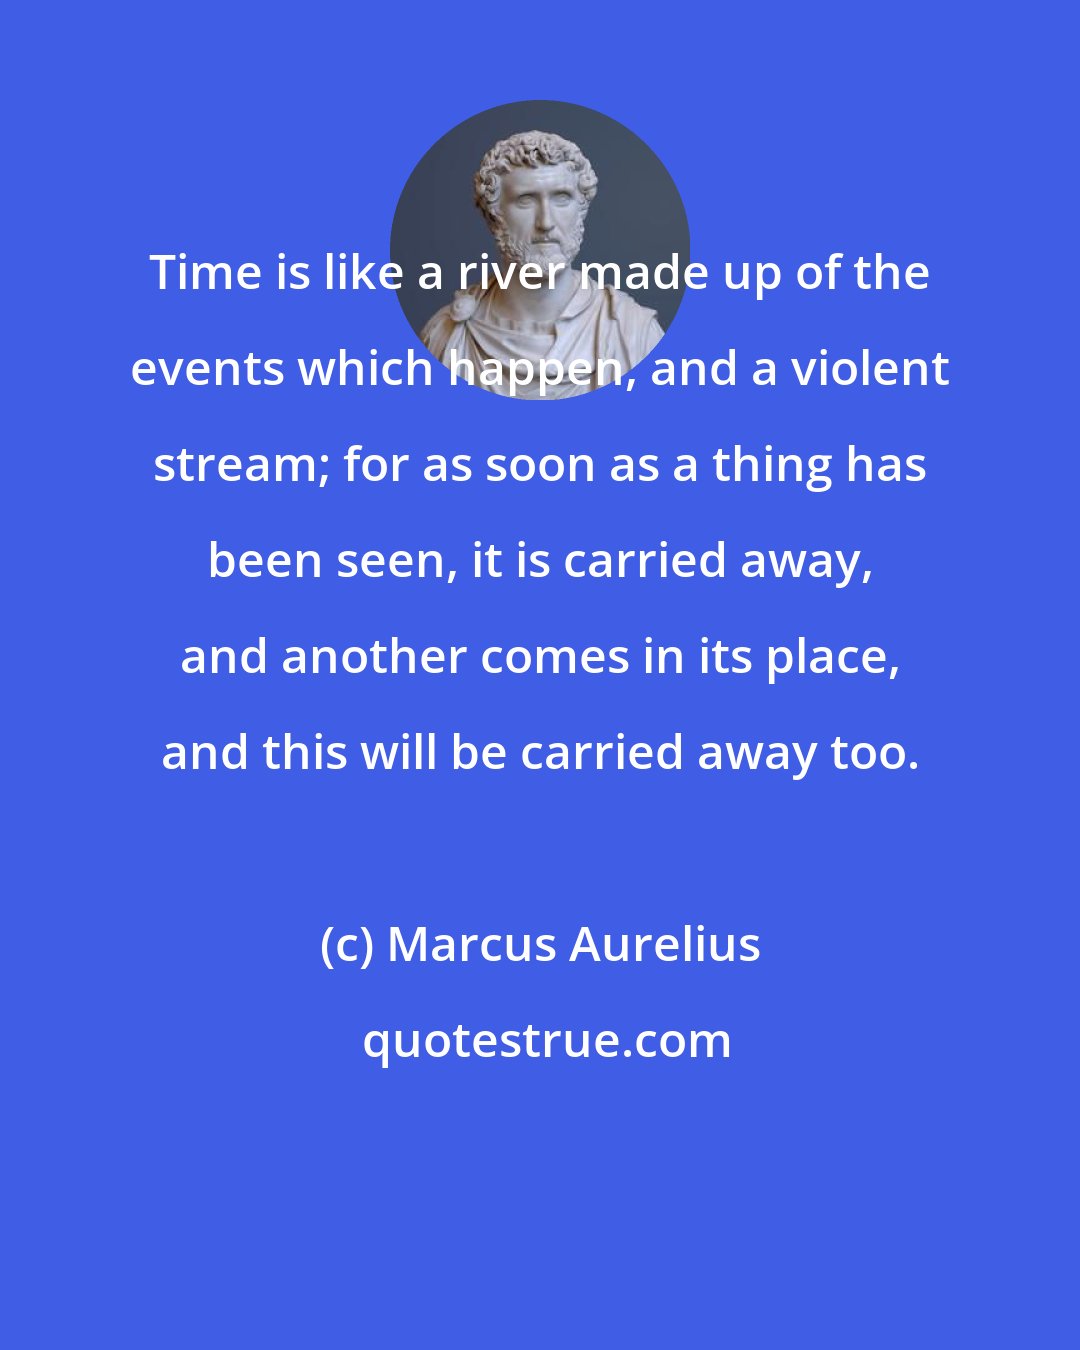 Marcus Aurelius: Time is like a river made up of the events which happen, and a violent stream; for as soon as a thing has been seen, it is carried away, and another comes in its place, and this will be carried away too.